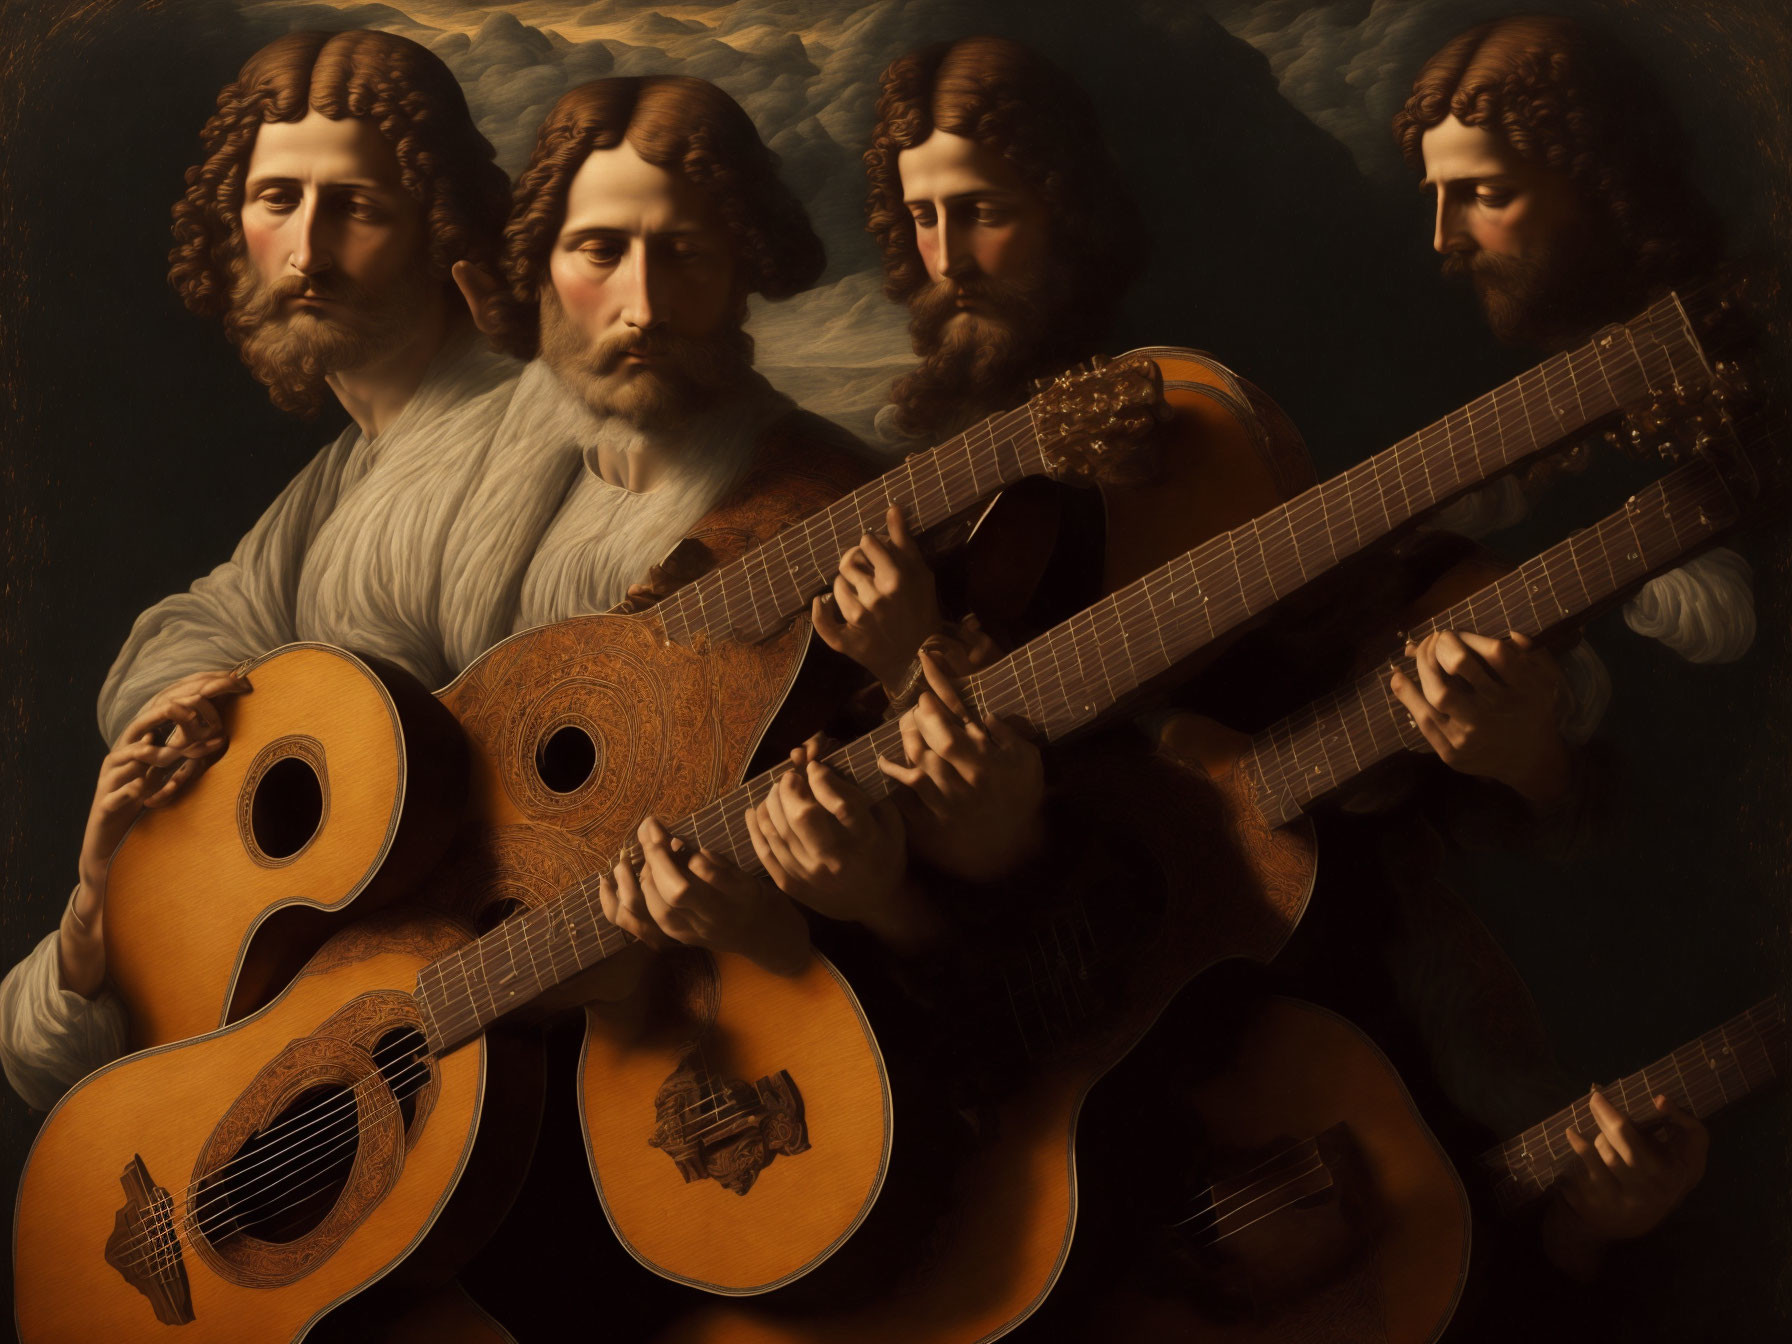 Surreal image of multi-armed figure with guitars in Renaissance-style setting